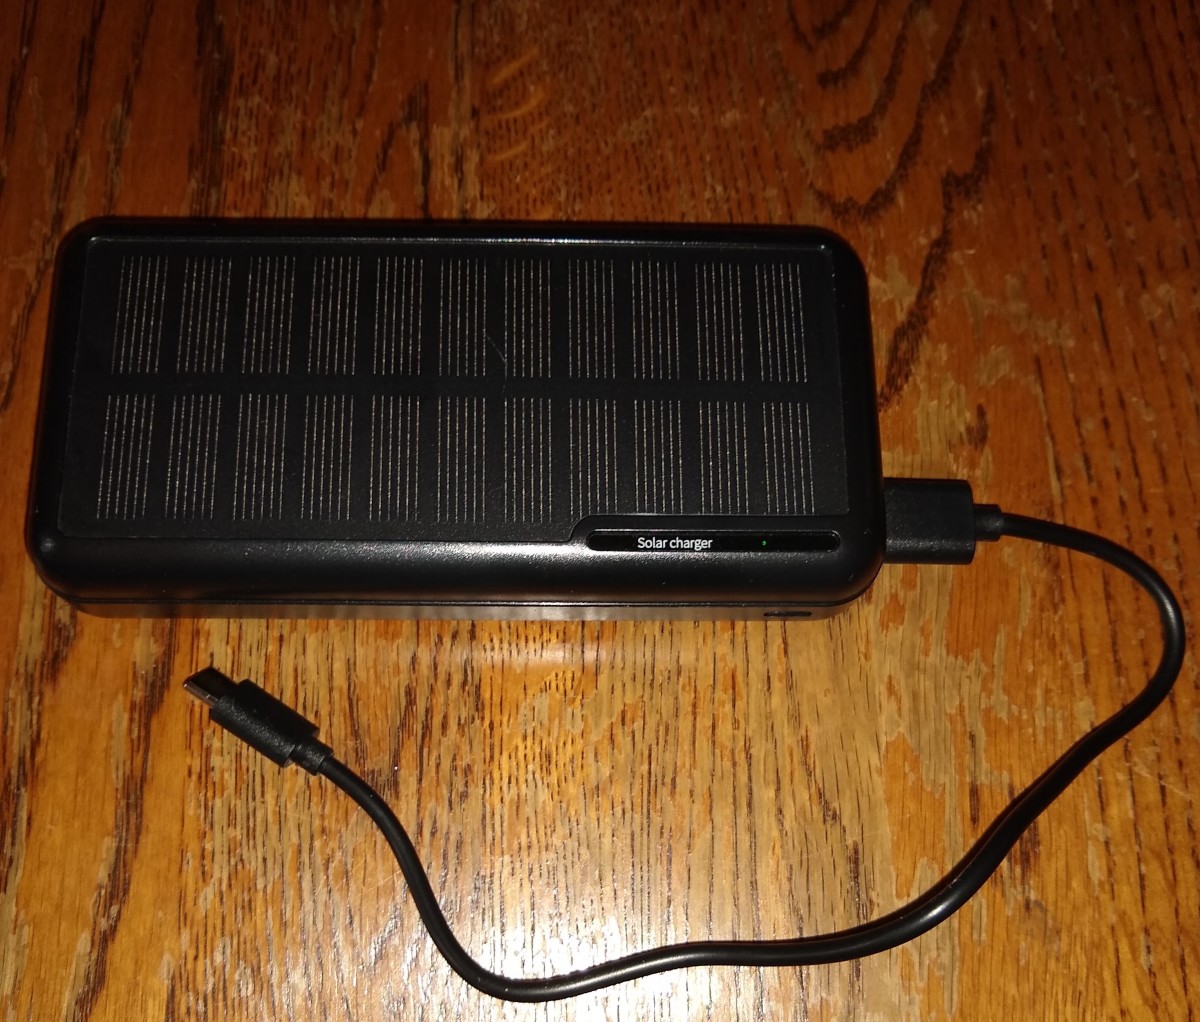 Minrise Portable Charger Review